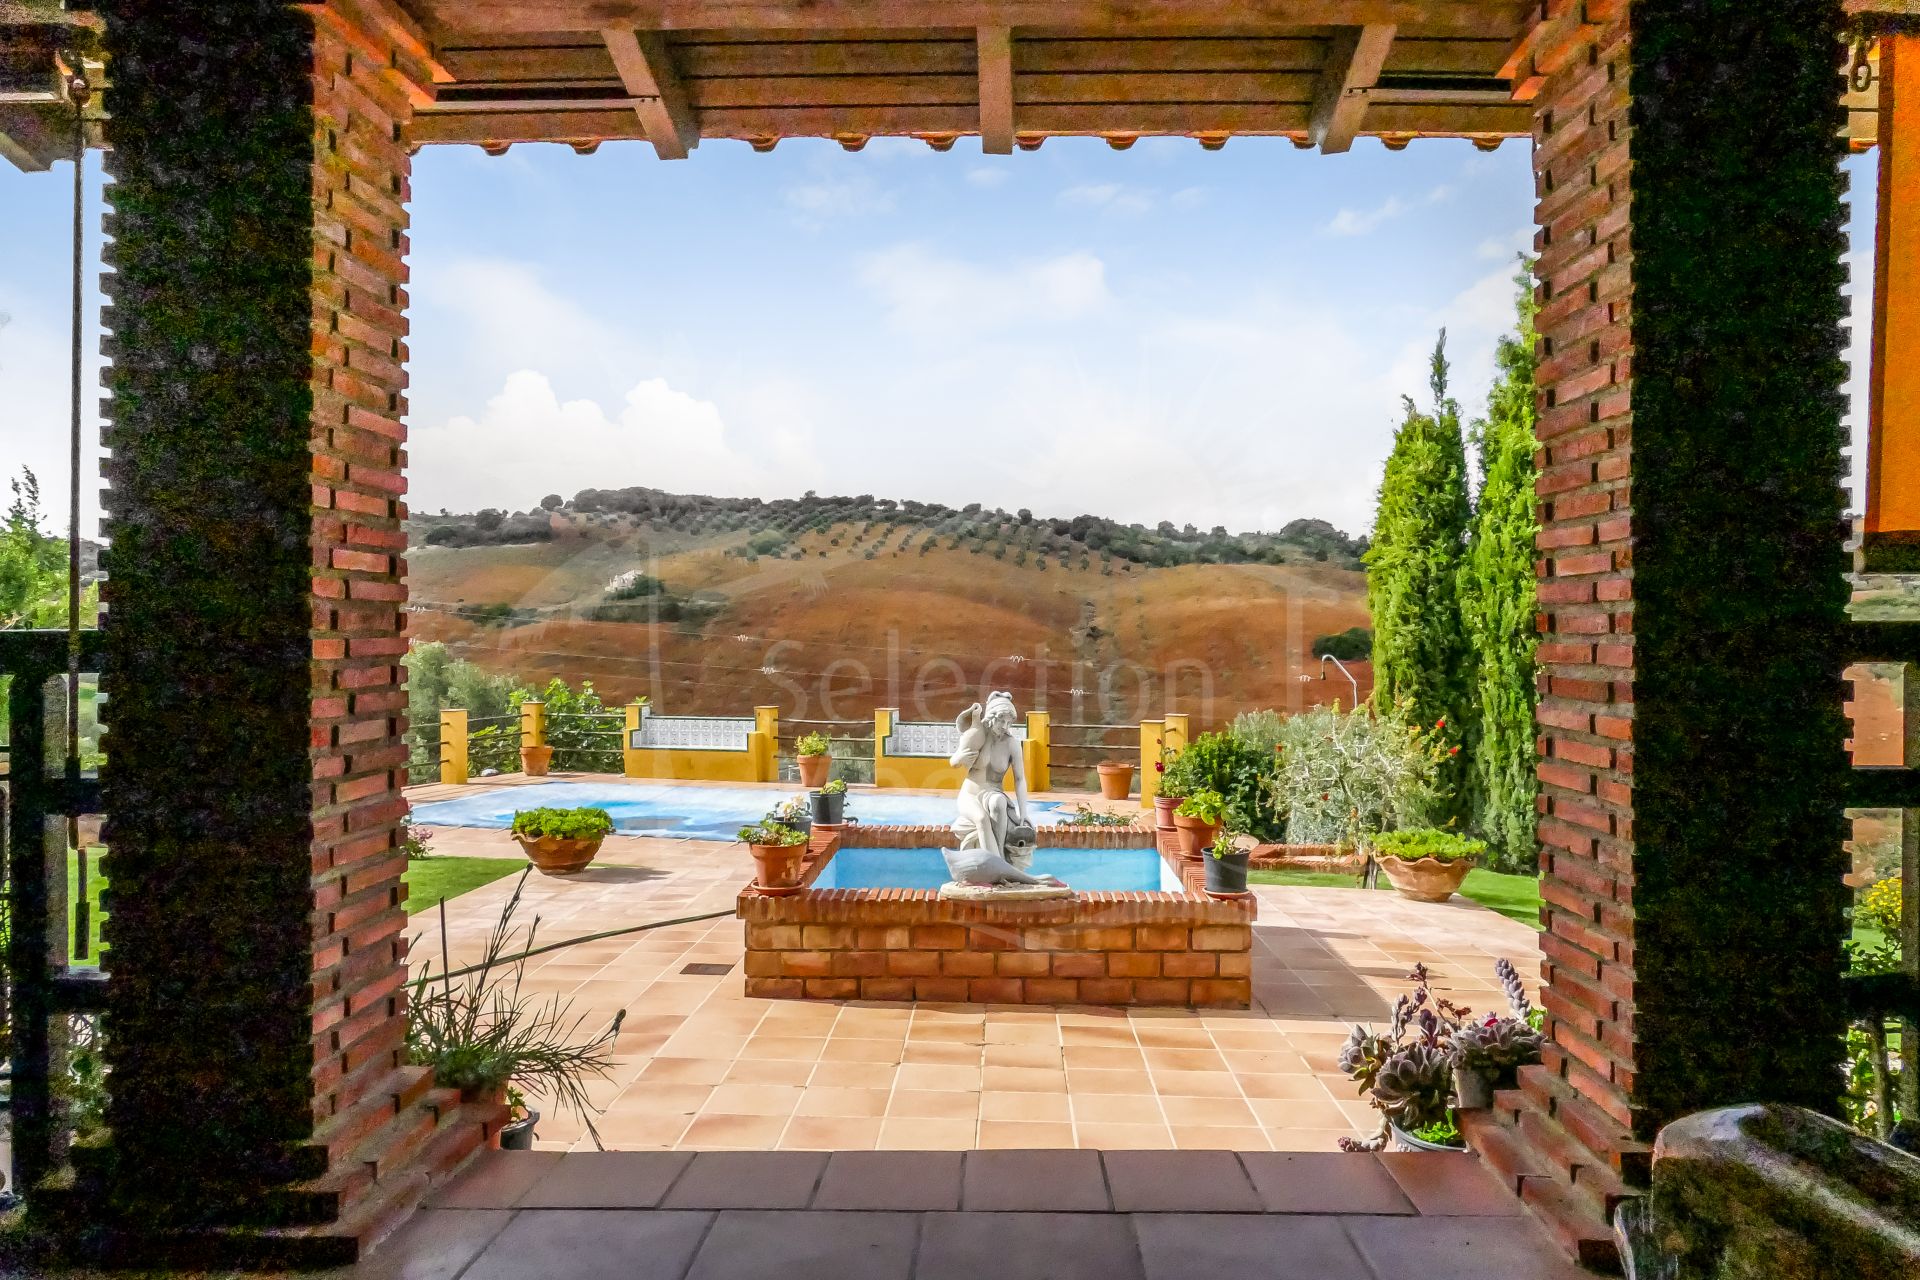 A beautiful cortijo with total peace and privacy